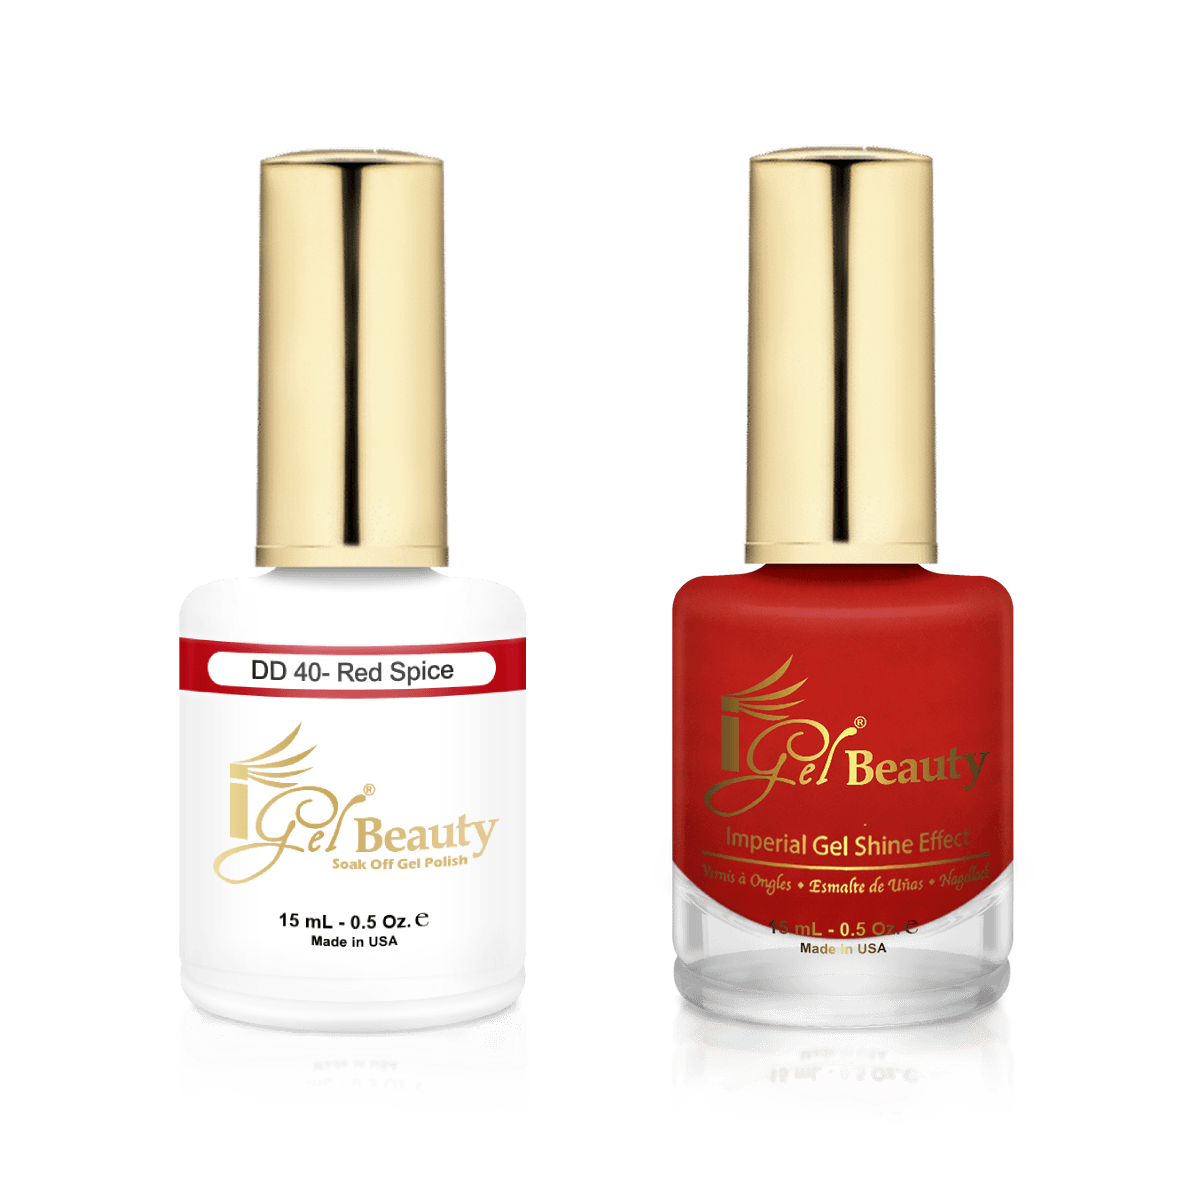 IGel Duo Gel Polish + Matching Nail Lacquer DD 40 RED SPICE